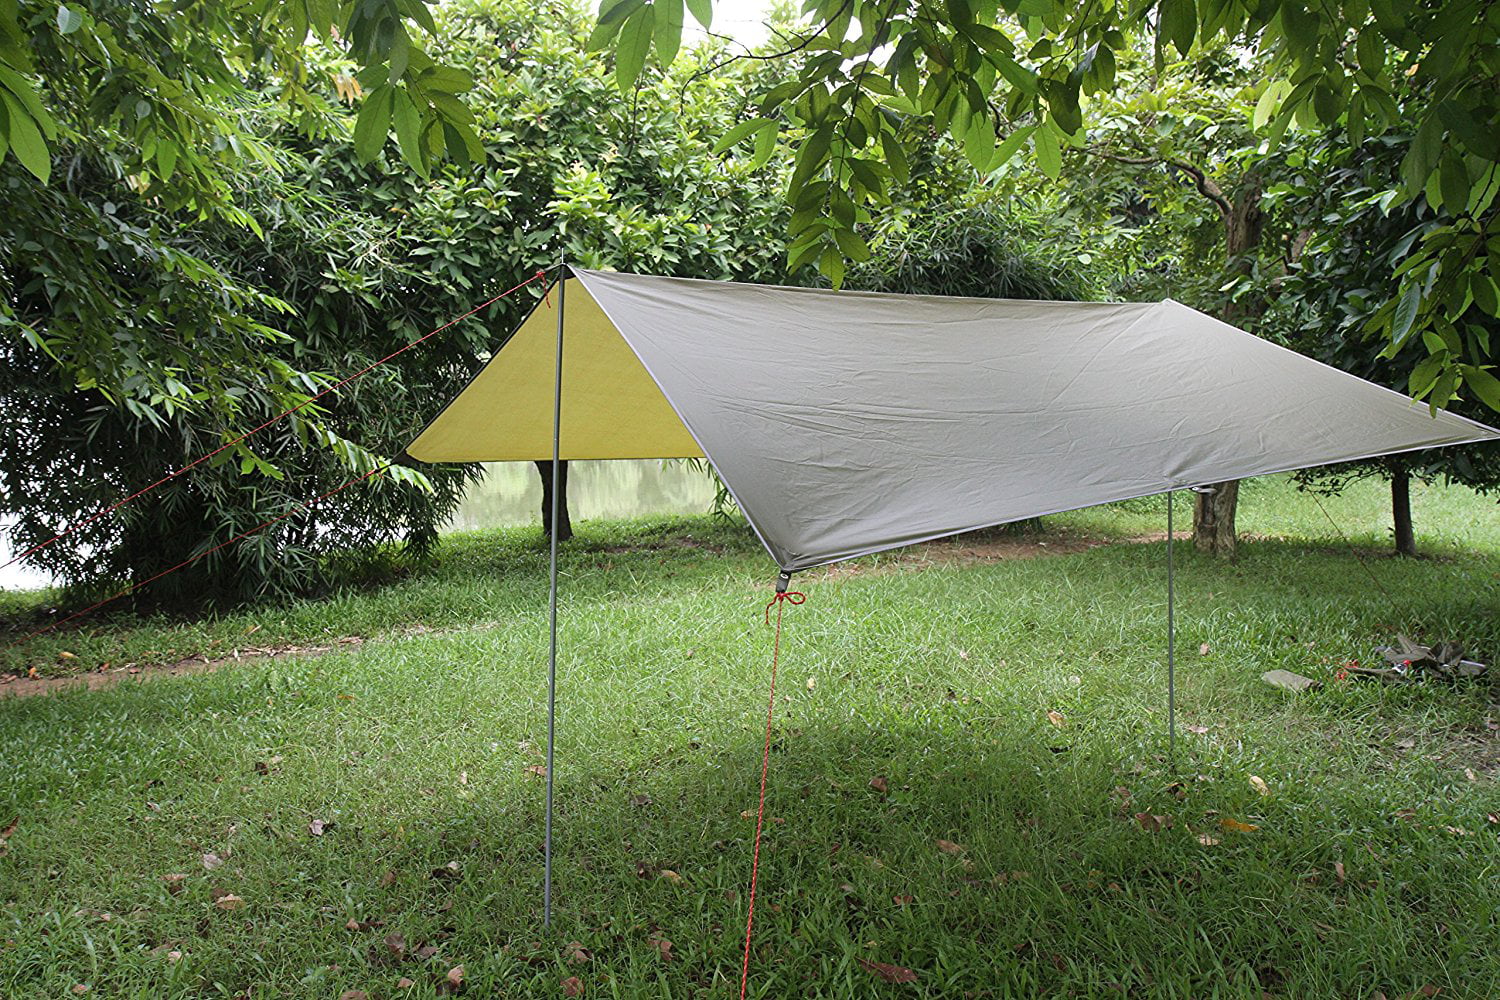 Tarp Shelter Suitble for 3 to 4 Person 9.5 by 9.5 Foot with 6 Rings AsOutdo...